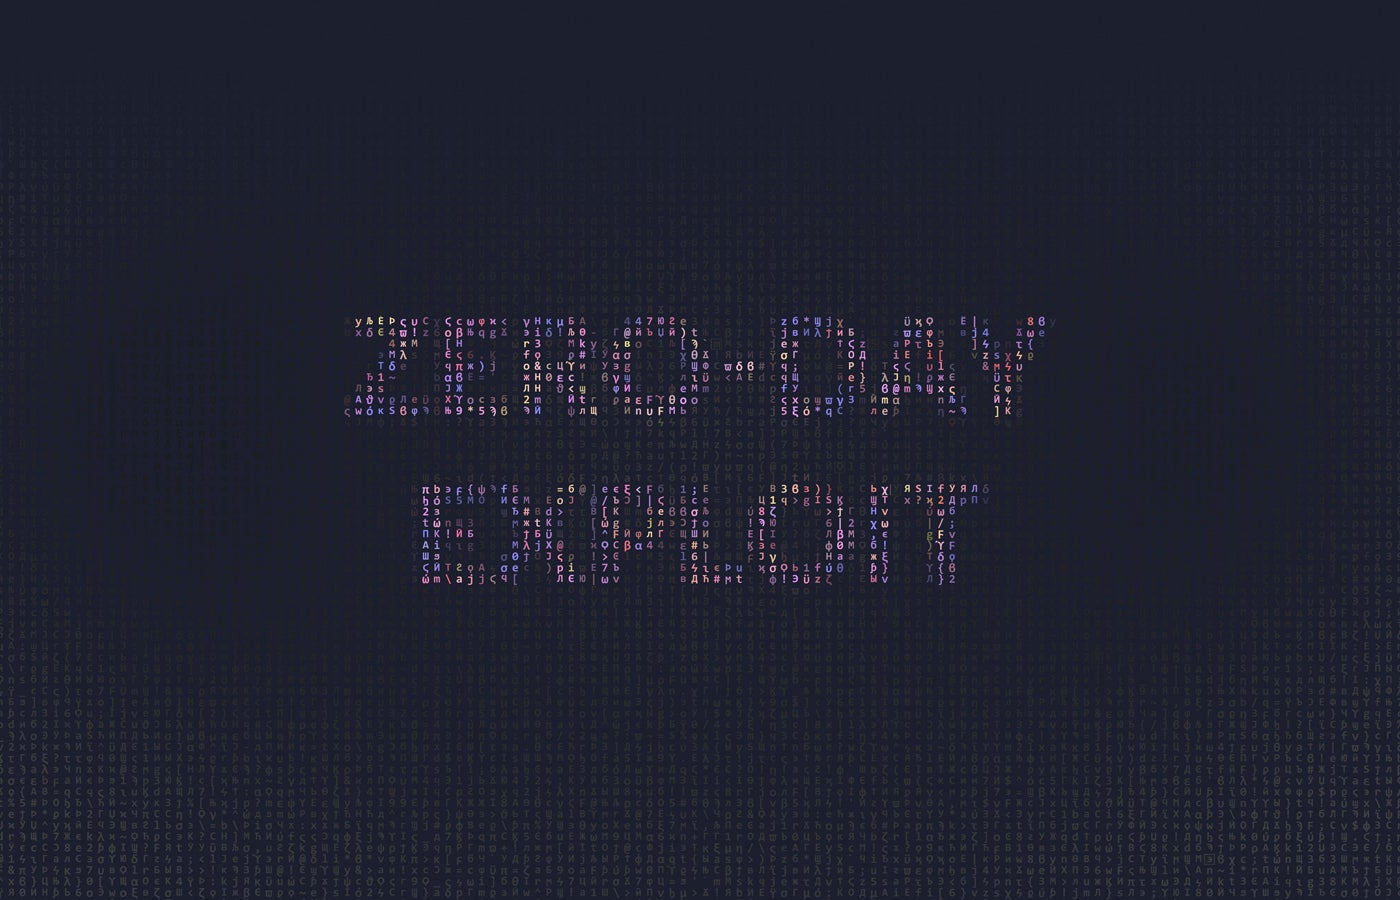 tr_20240621-zero-day-exploits-the-smart-persons-guide.jpg